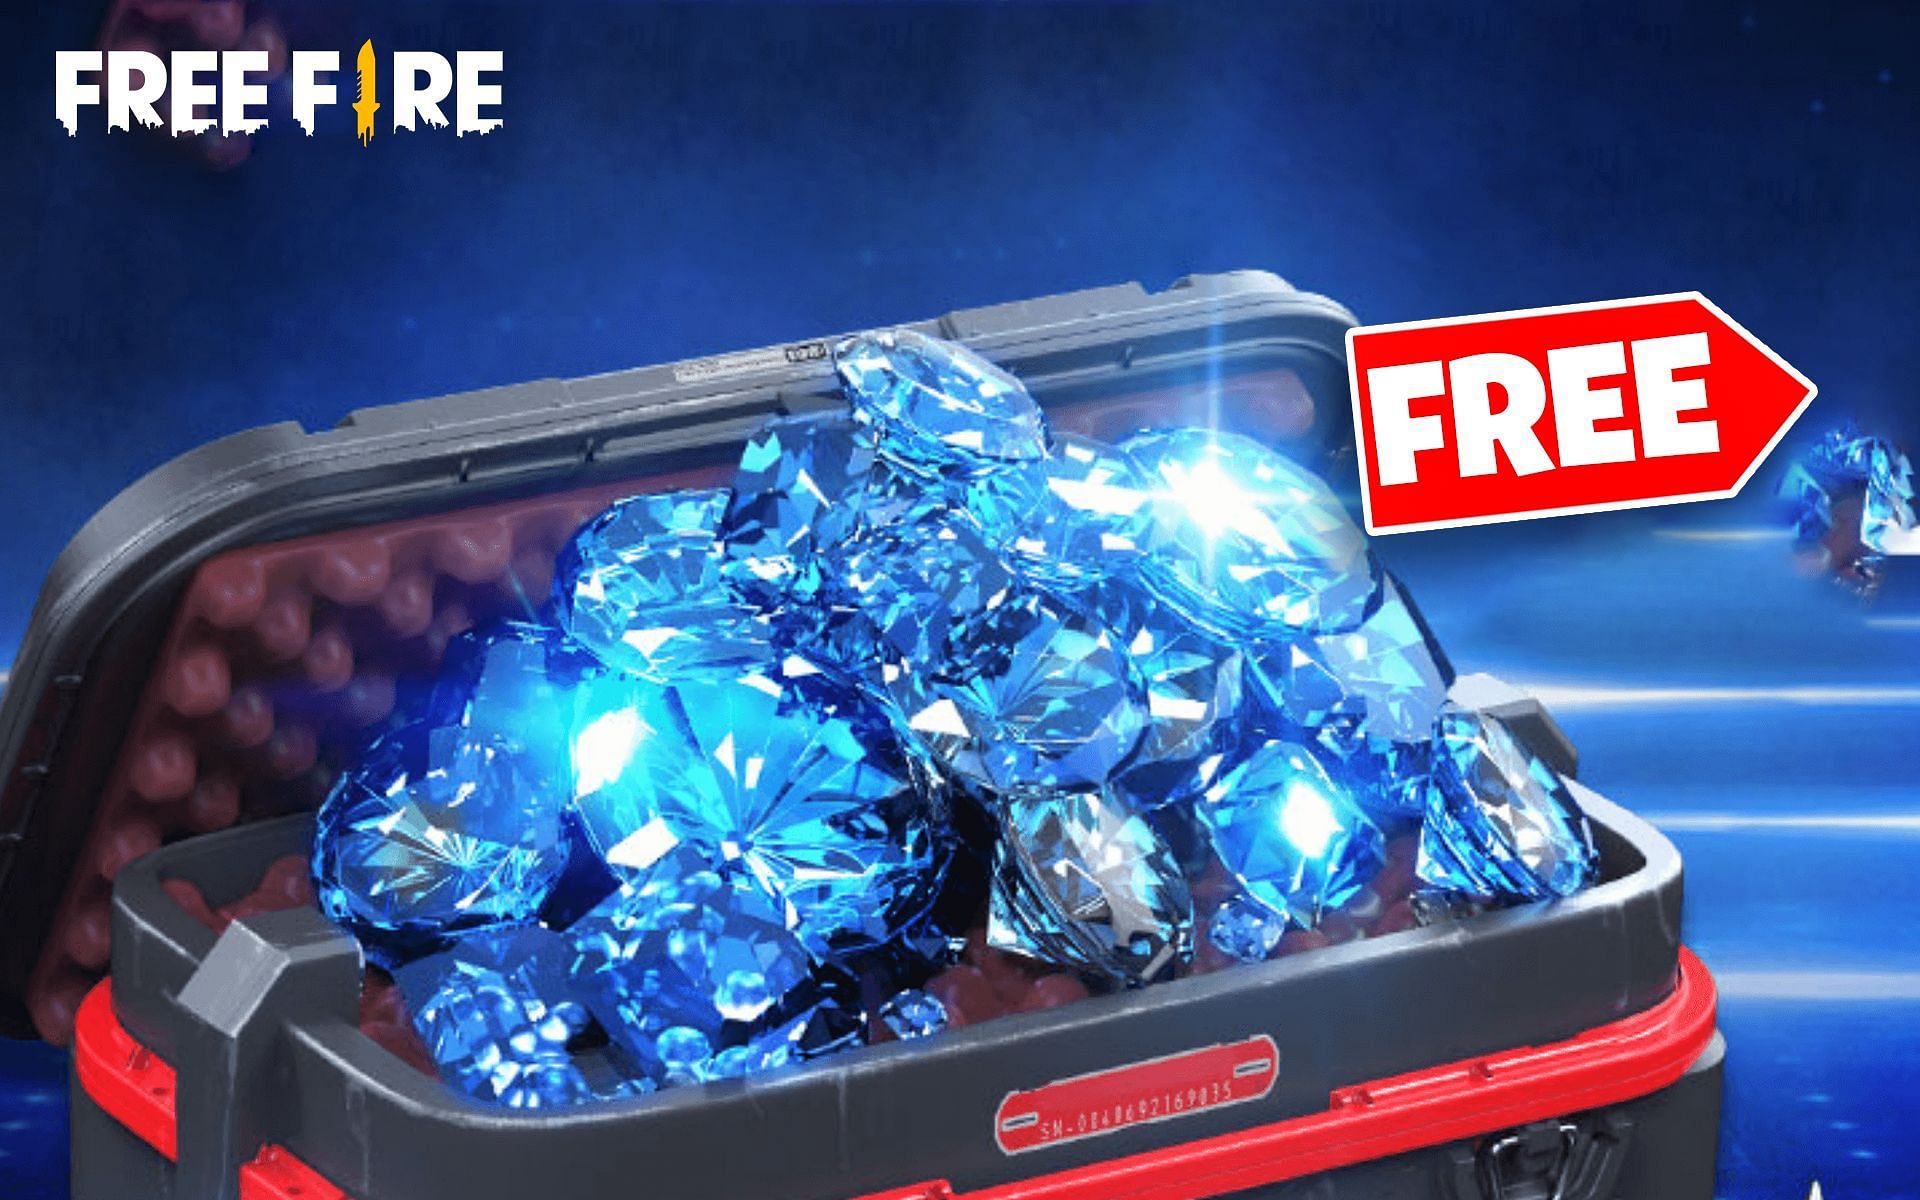 How to get free diamonds in Free Fire using Android apps